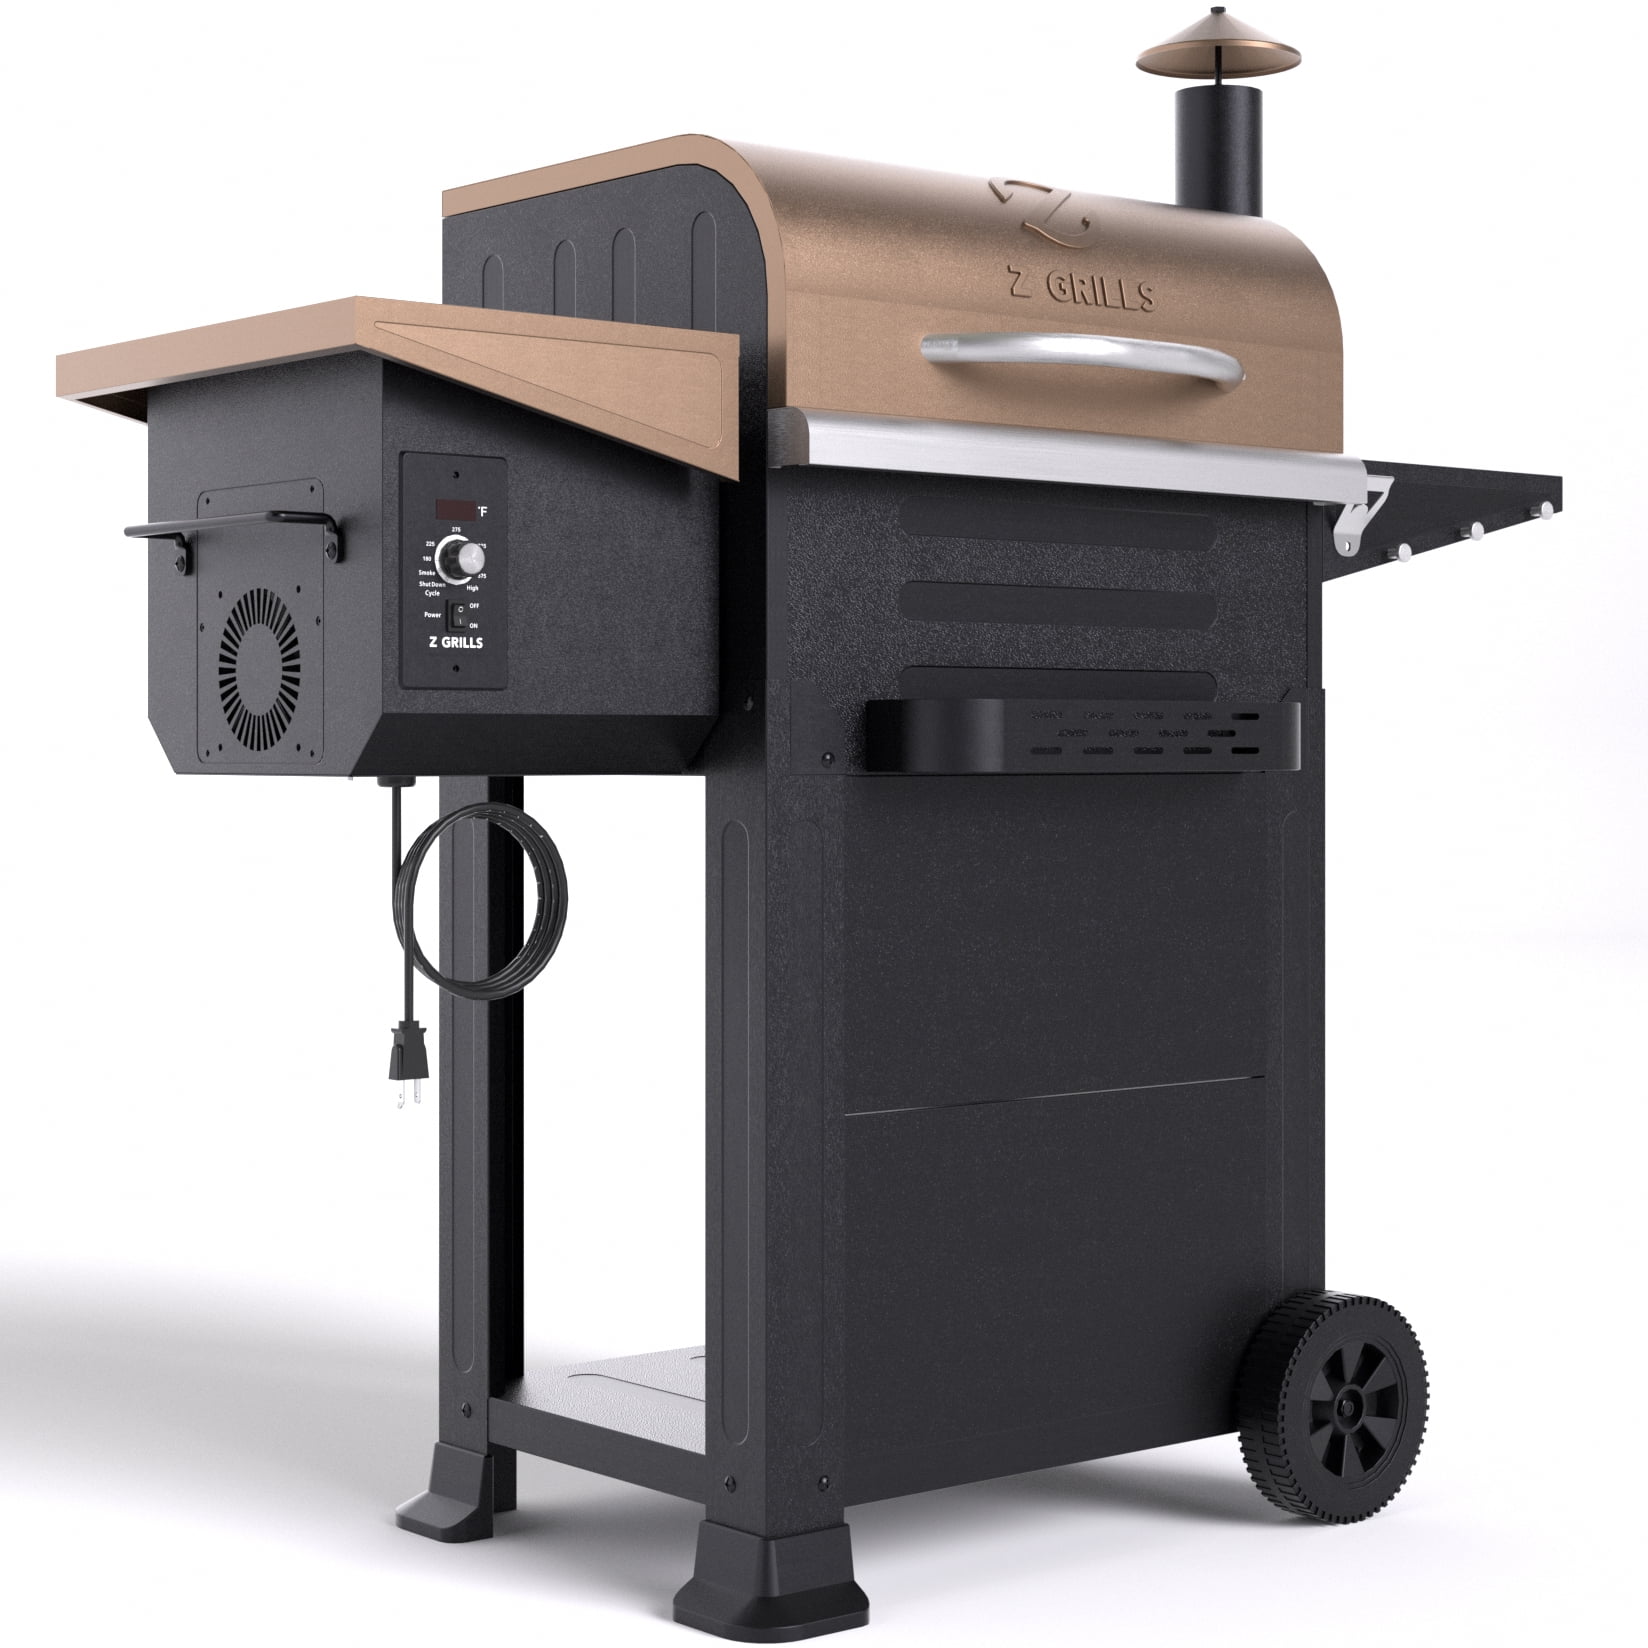 GRILLS ZPG-6002B 573 sq. in. Wood Pellet Grill and Copper -